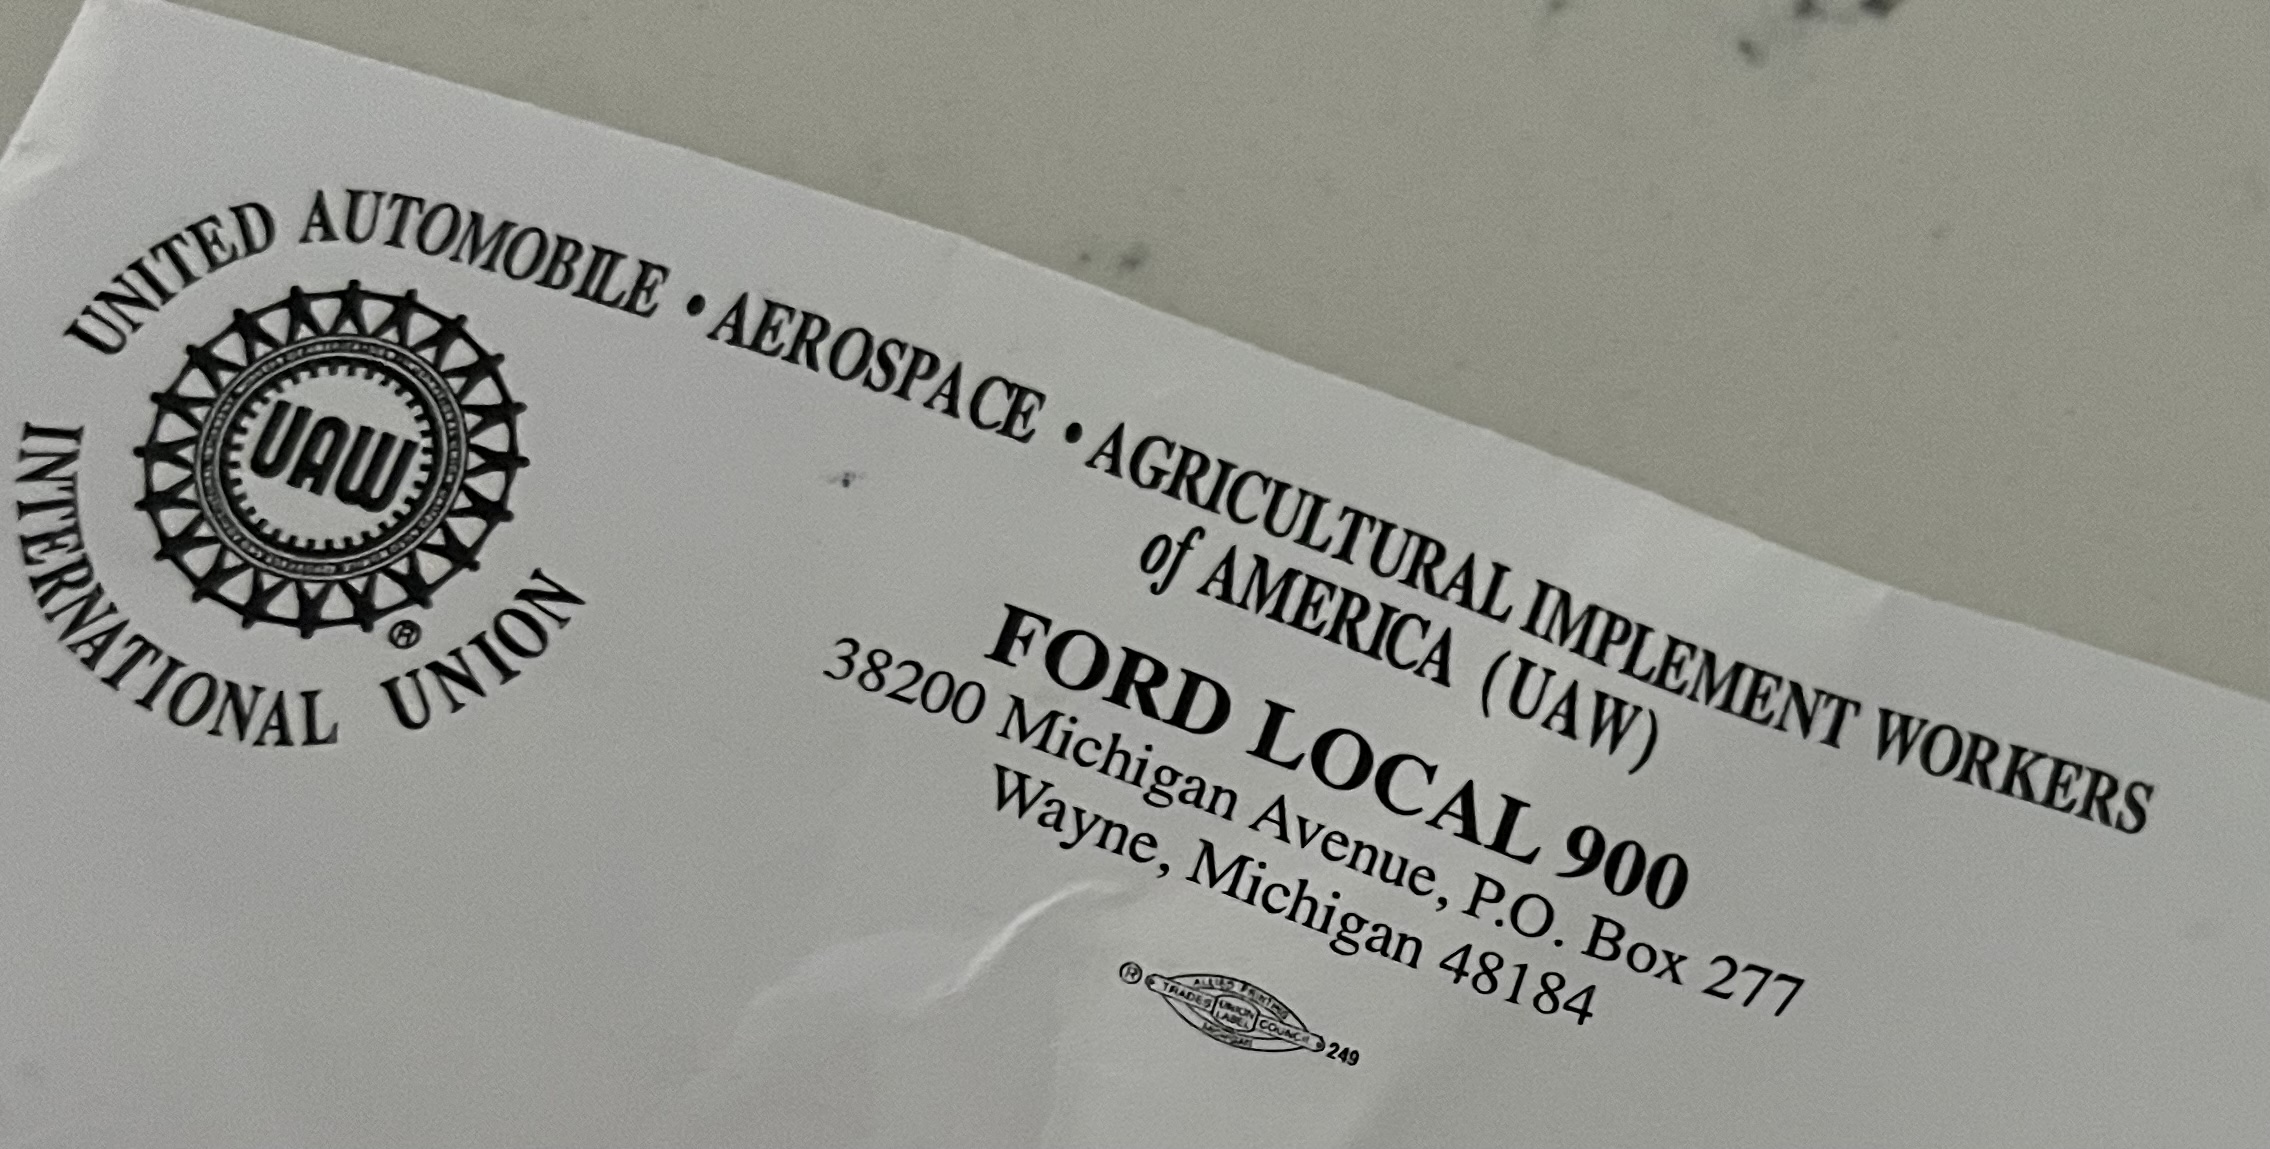 Ford Bronco This "Proudly Made in the U.S.A. Michigan Assembly Plant" sticker will be on windshields of all Broncos produced at MAP A905ABC5-9798-461B-8B8D-C6150657BD09